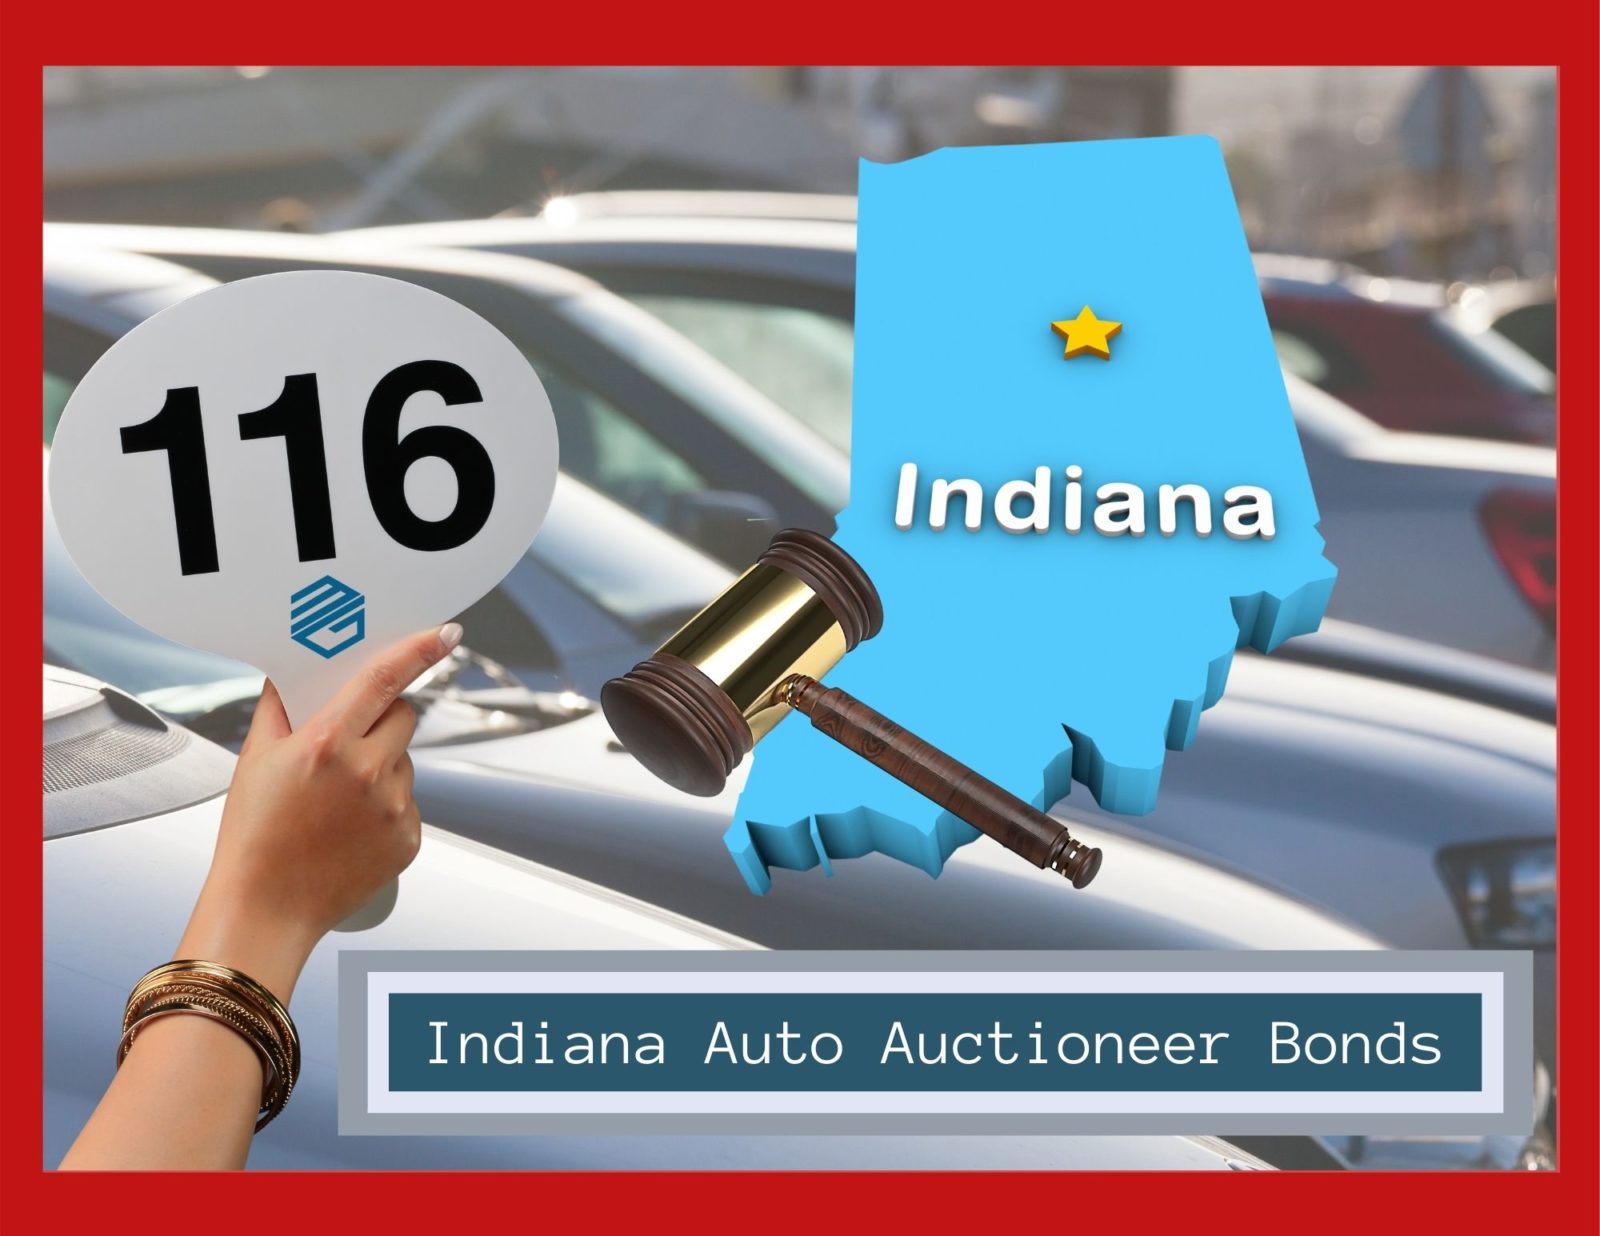 Indiana Automobile Auction Company Bonds - Shows a car lot in the background, the state of Indiana in blue, an auction gavel and a person bidding. Text box says, "Indiana Auto Auctioneer Bonds"